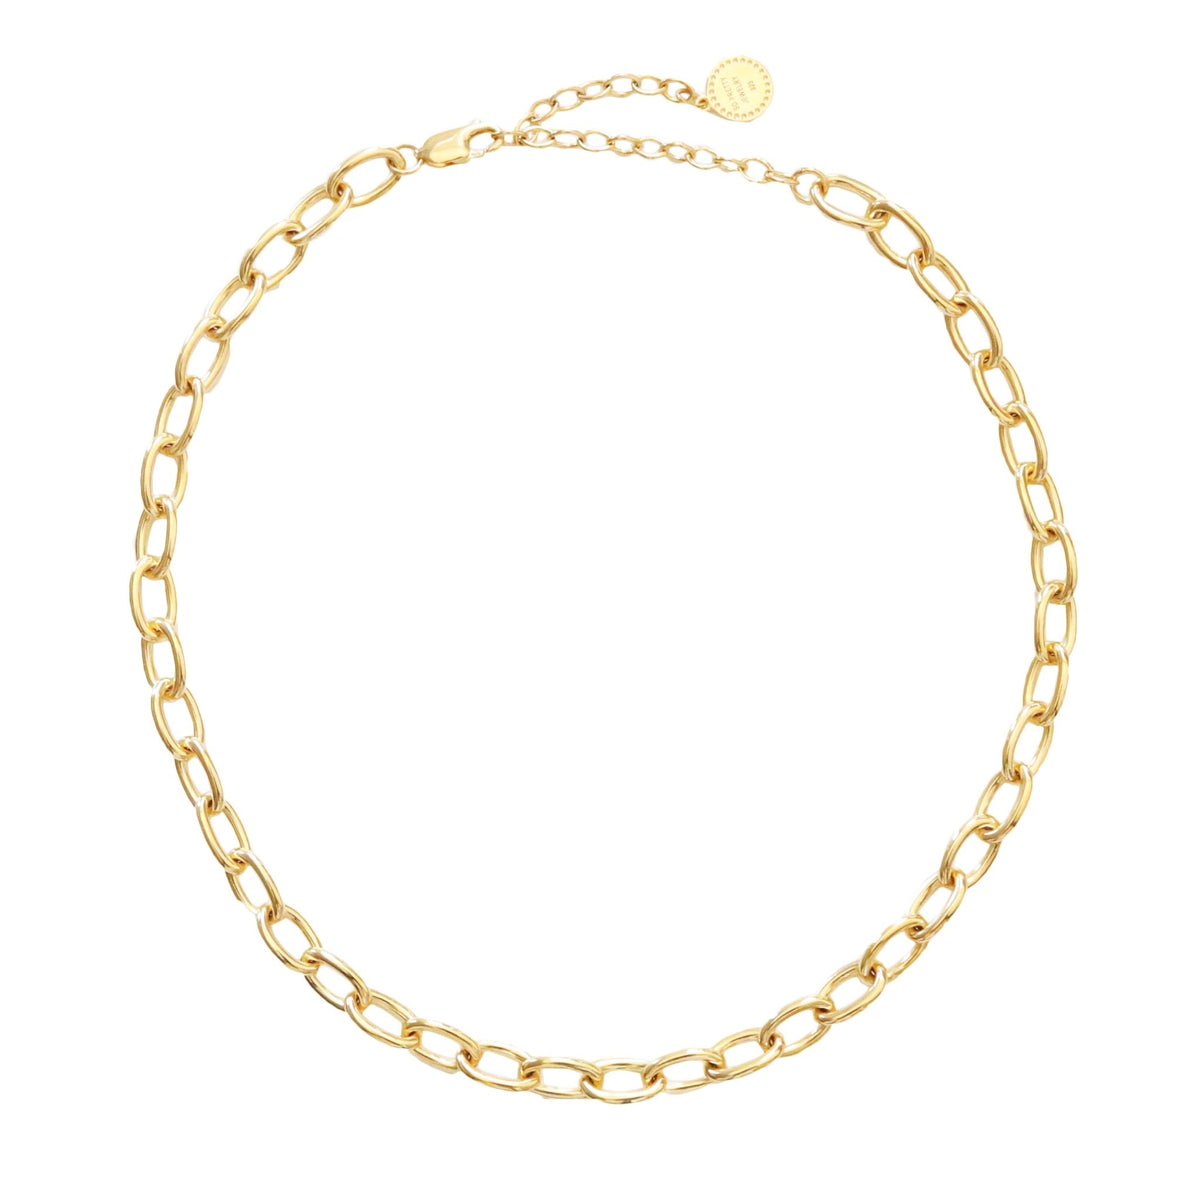 POISE HEAVY OVAL LINK NECKLACE - GOLD 15-18” - SO PRETTY CARA COTTER